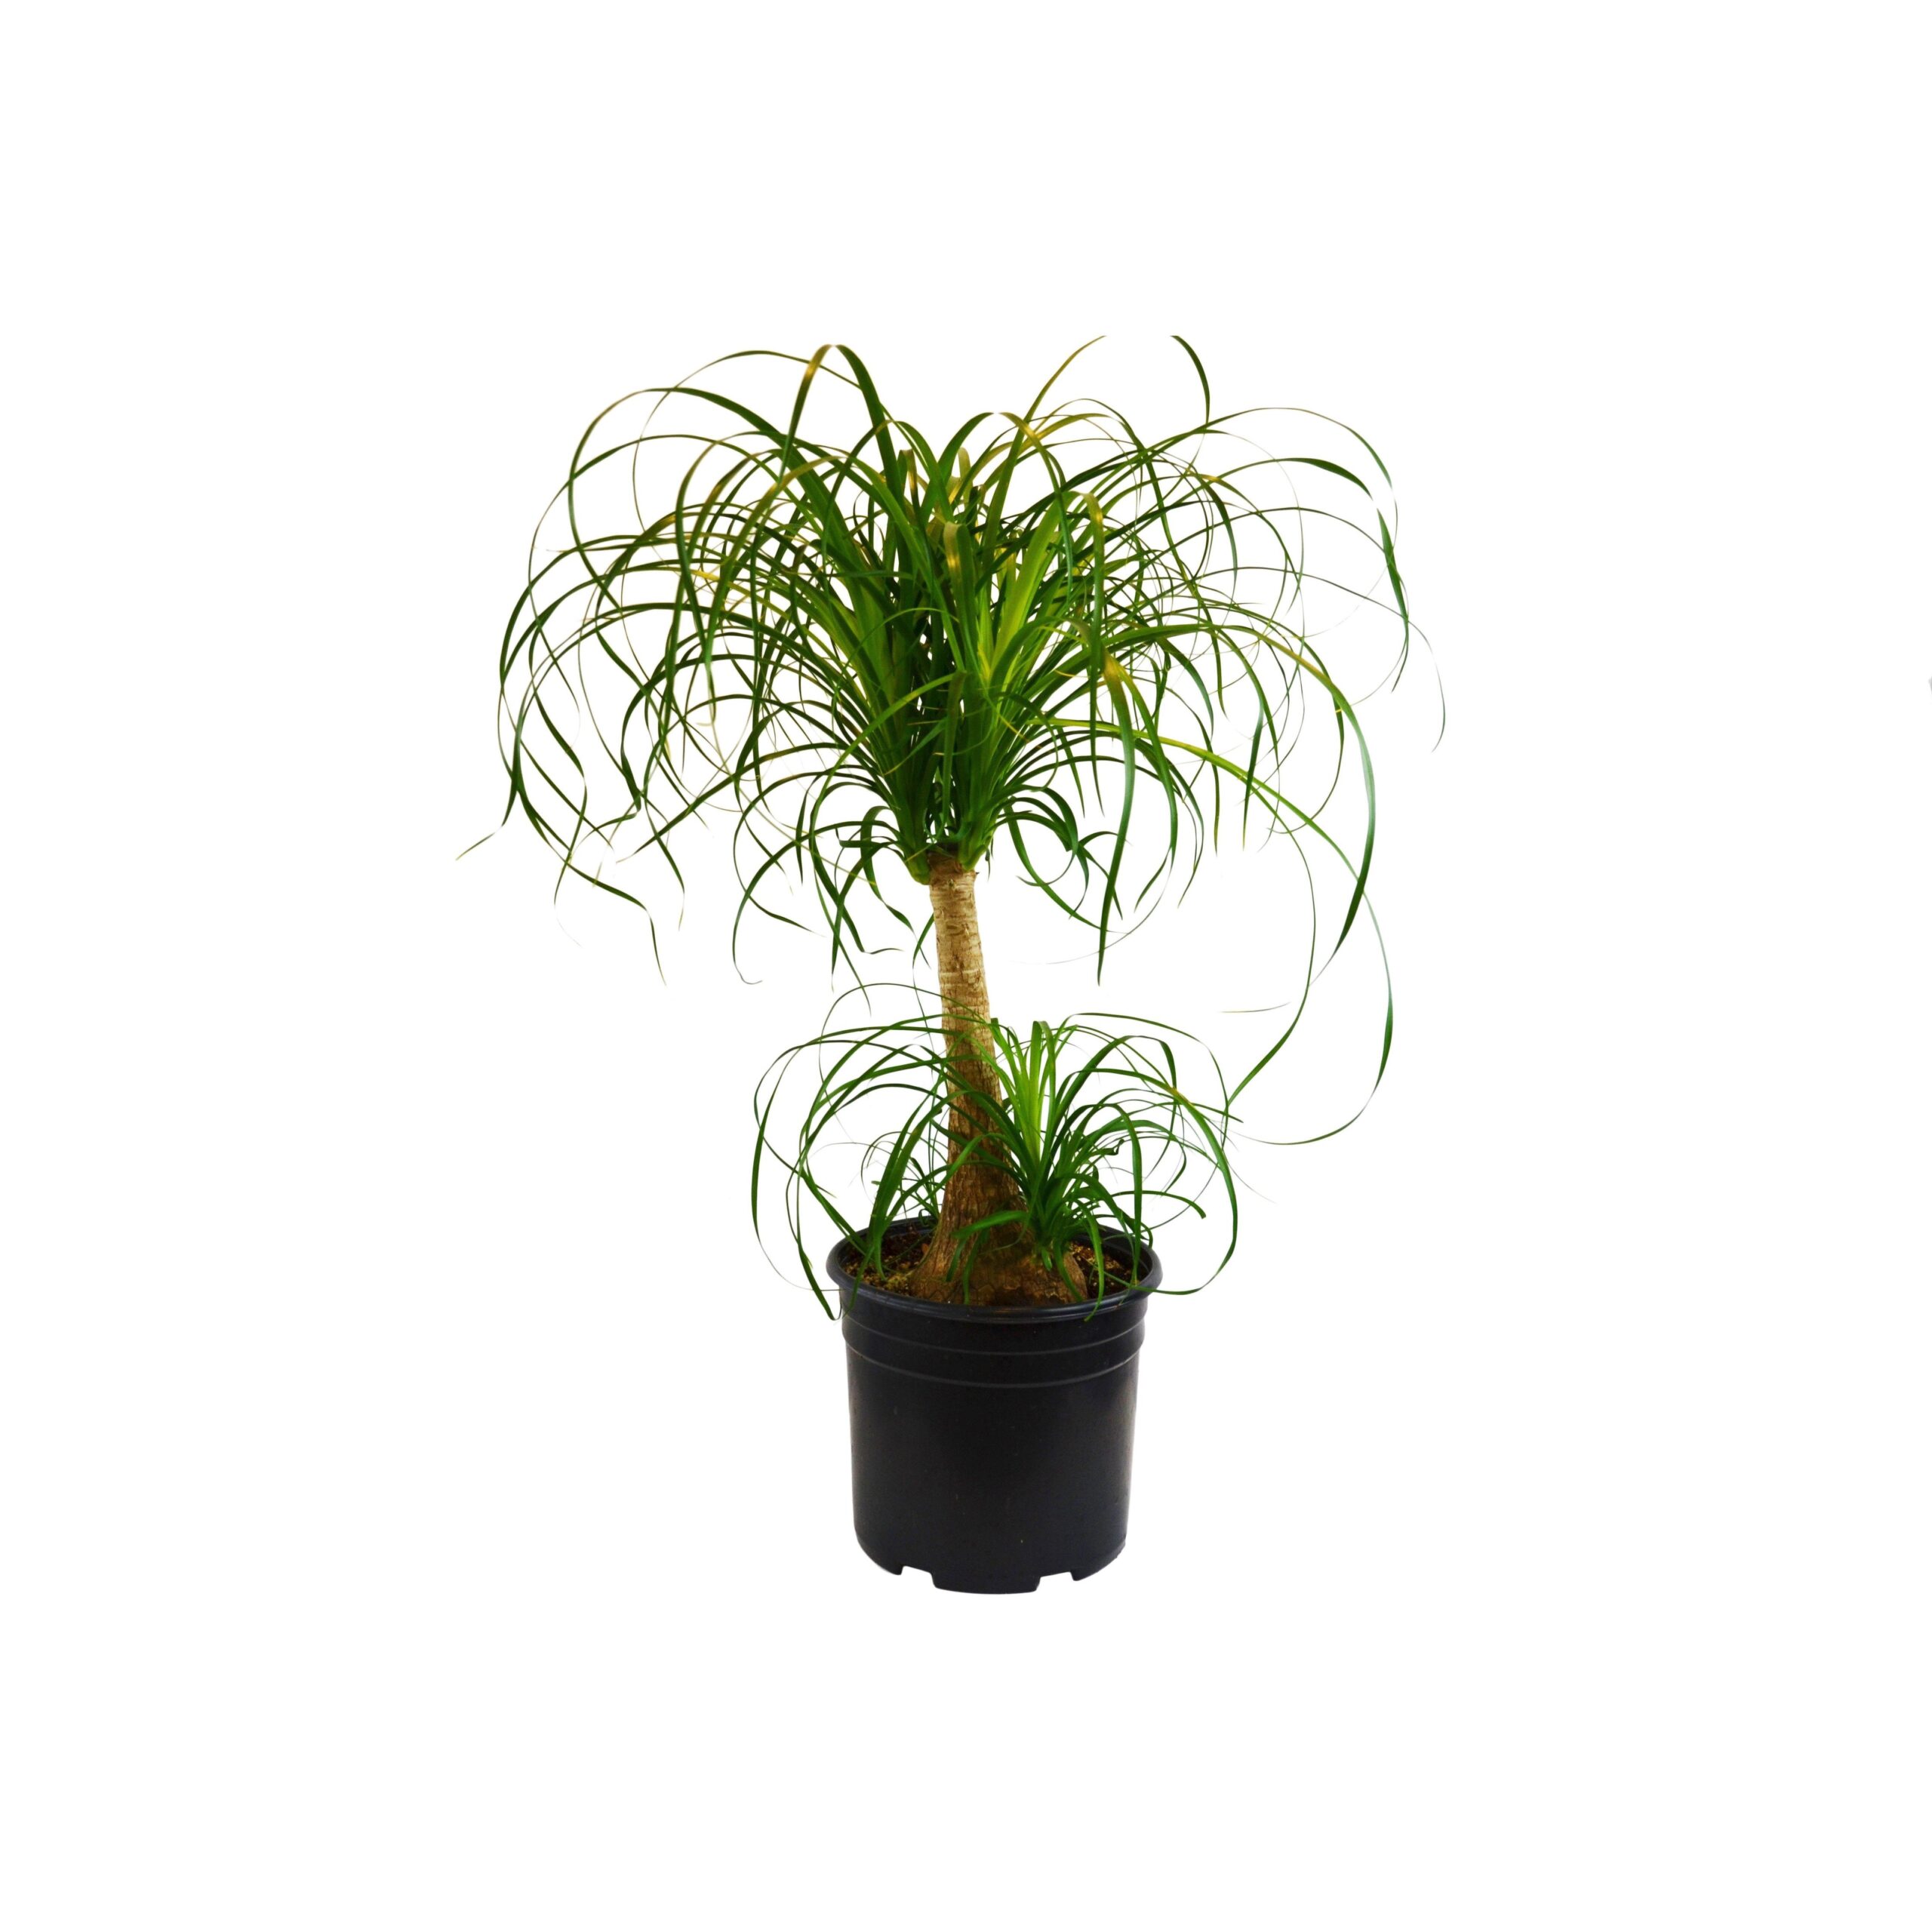 A small plant in a black pot, displayed on a white background at the best garden center near me.